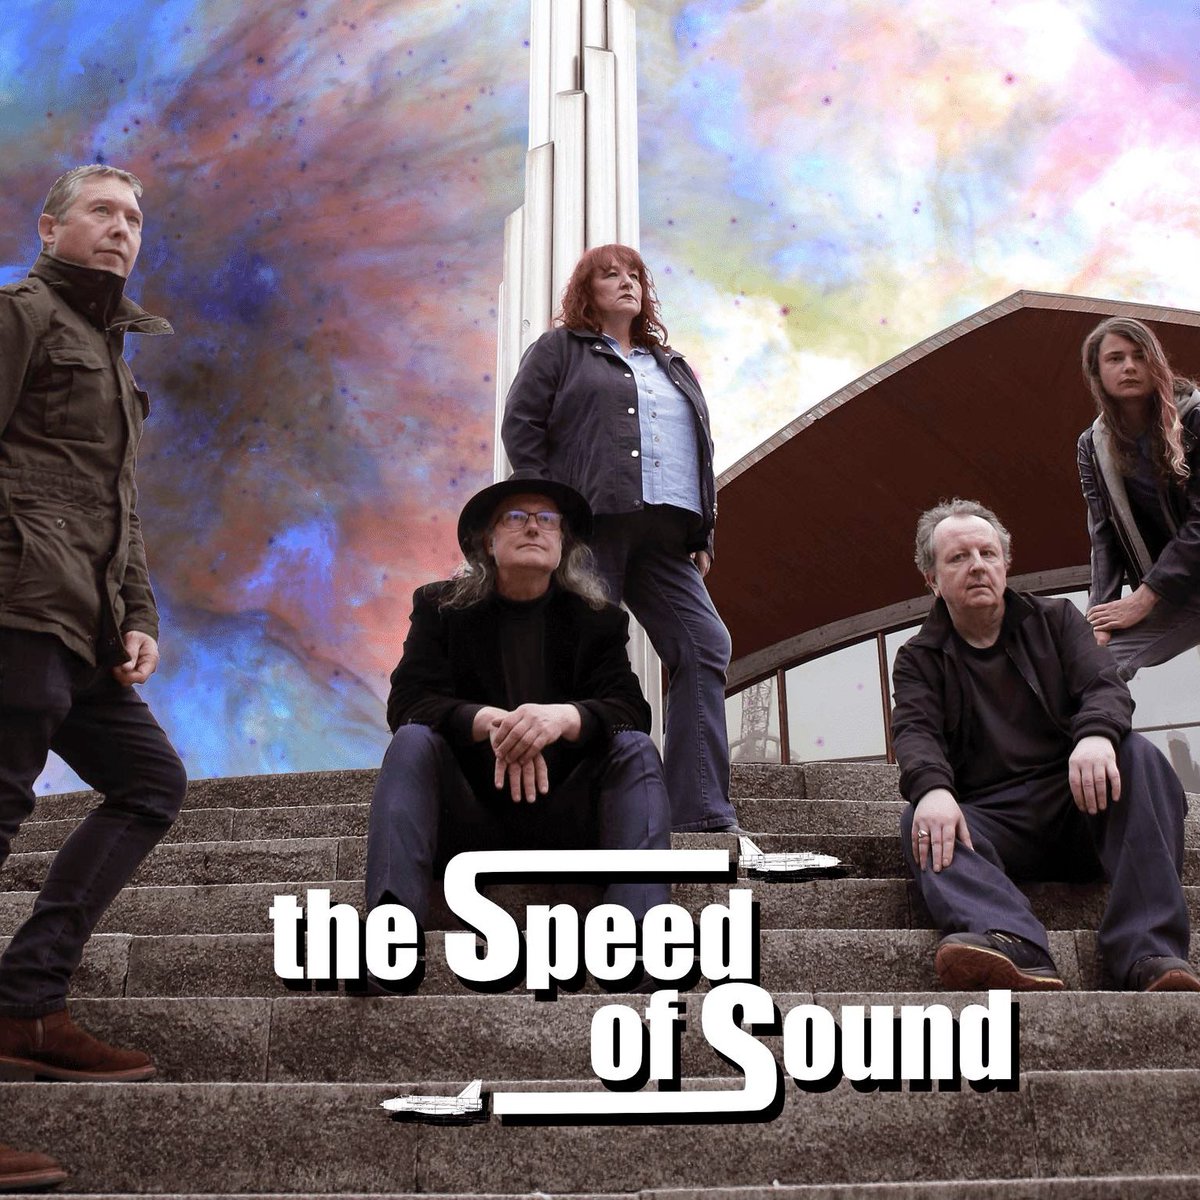 'sound that captures the spirit of alternative rock and adds elements of orchestration from the 1970s and cinematic drama' #SkylightWebzine @BillyYfantis reviews new #TheSpeedofSound @SpeedOfSoundUK single 'The Great Acceleration' ~ tinyurl.com/sos-skylight @StirBig @MusicBlogRT